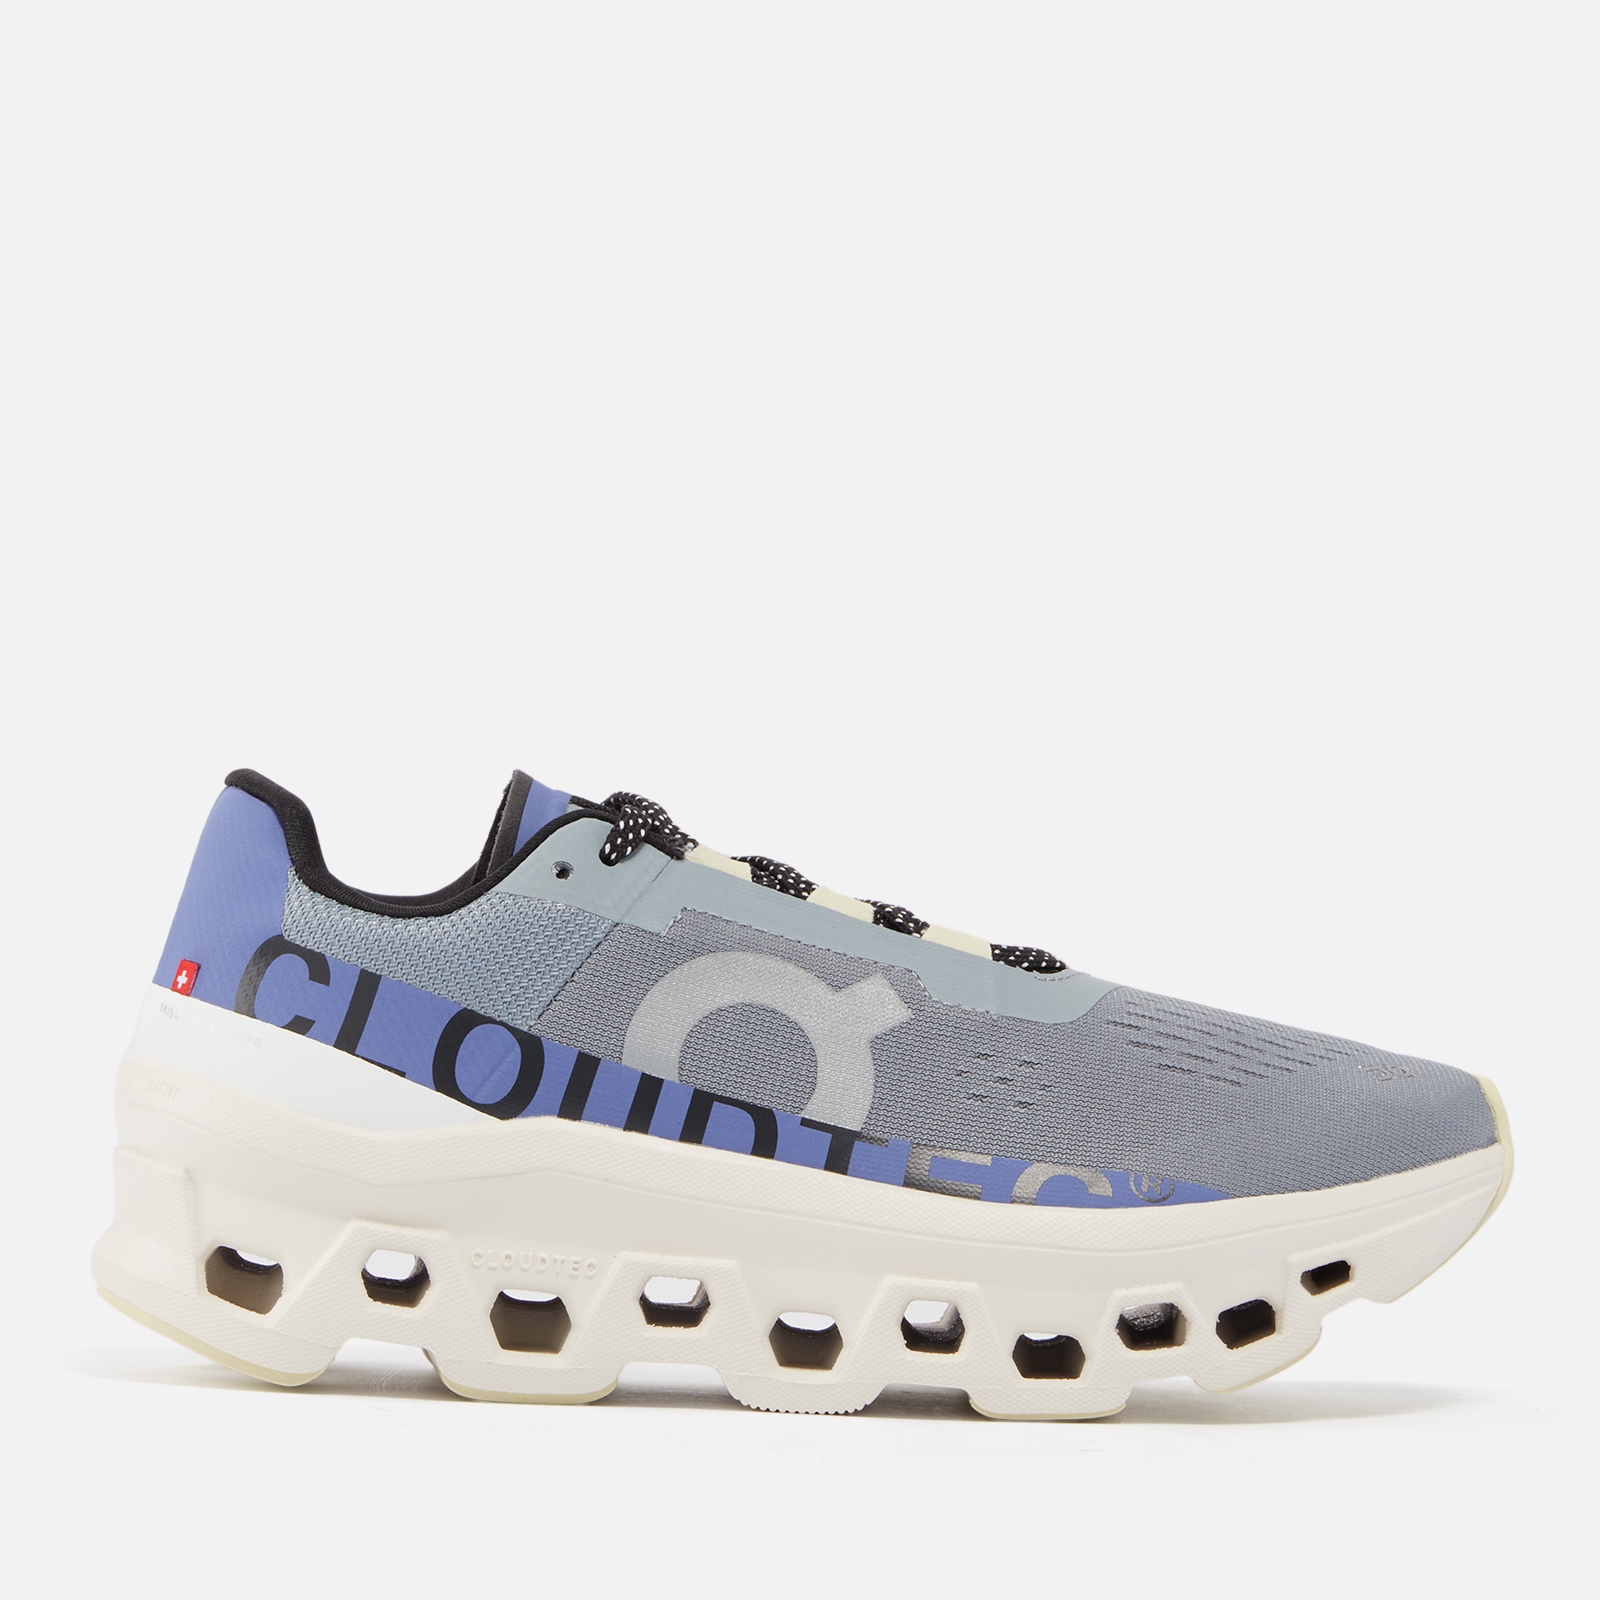 ON Women’s Cloudmonster Running Trainers - Mist/Blueberry